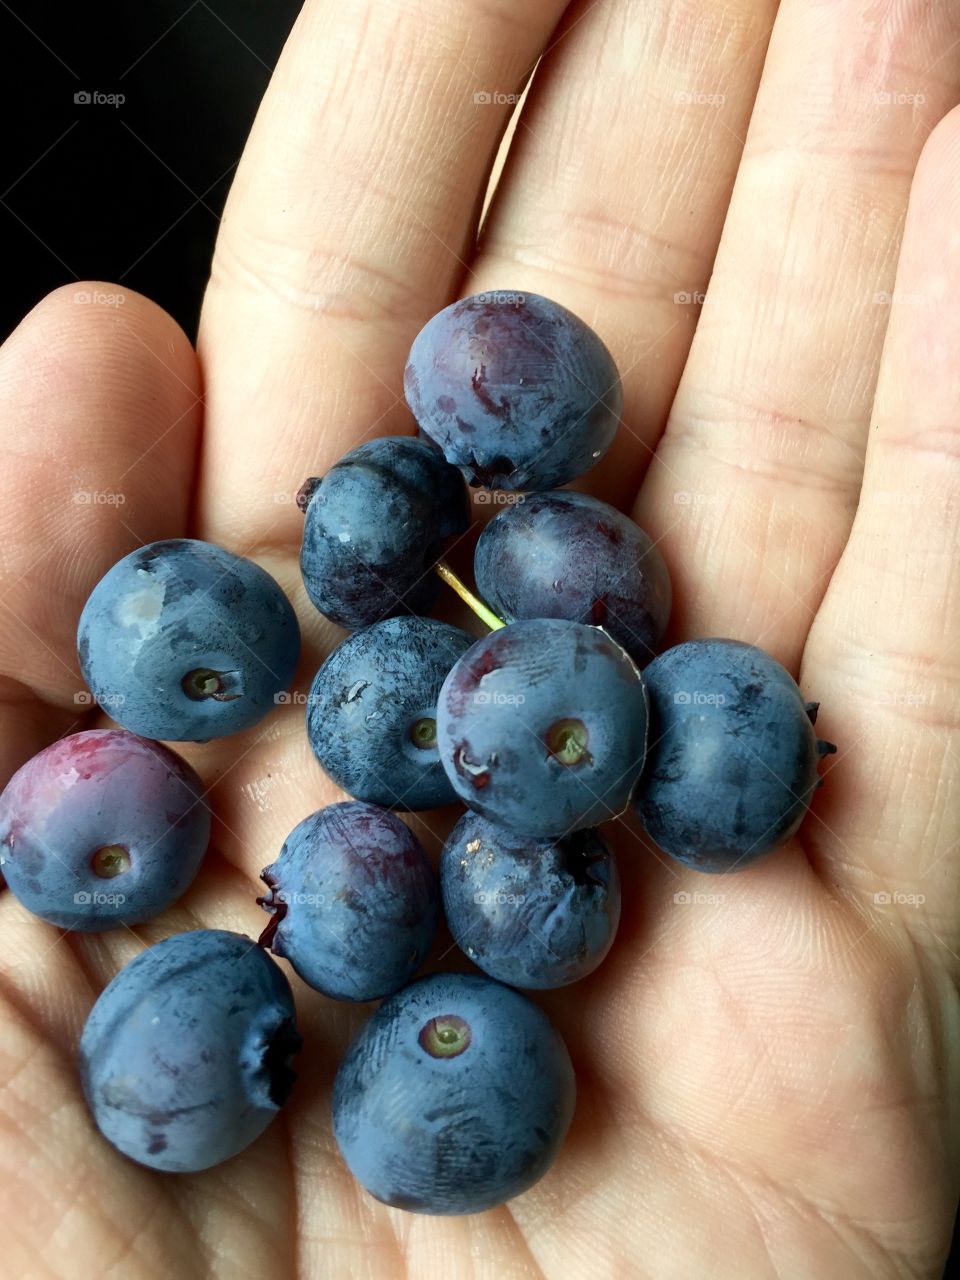 Blueberries on palm of hand